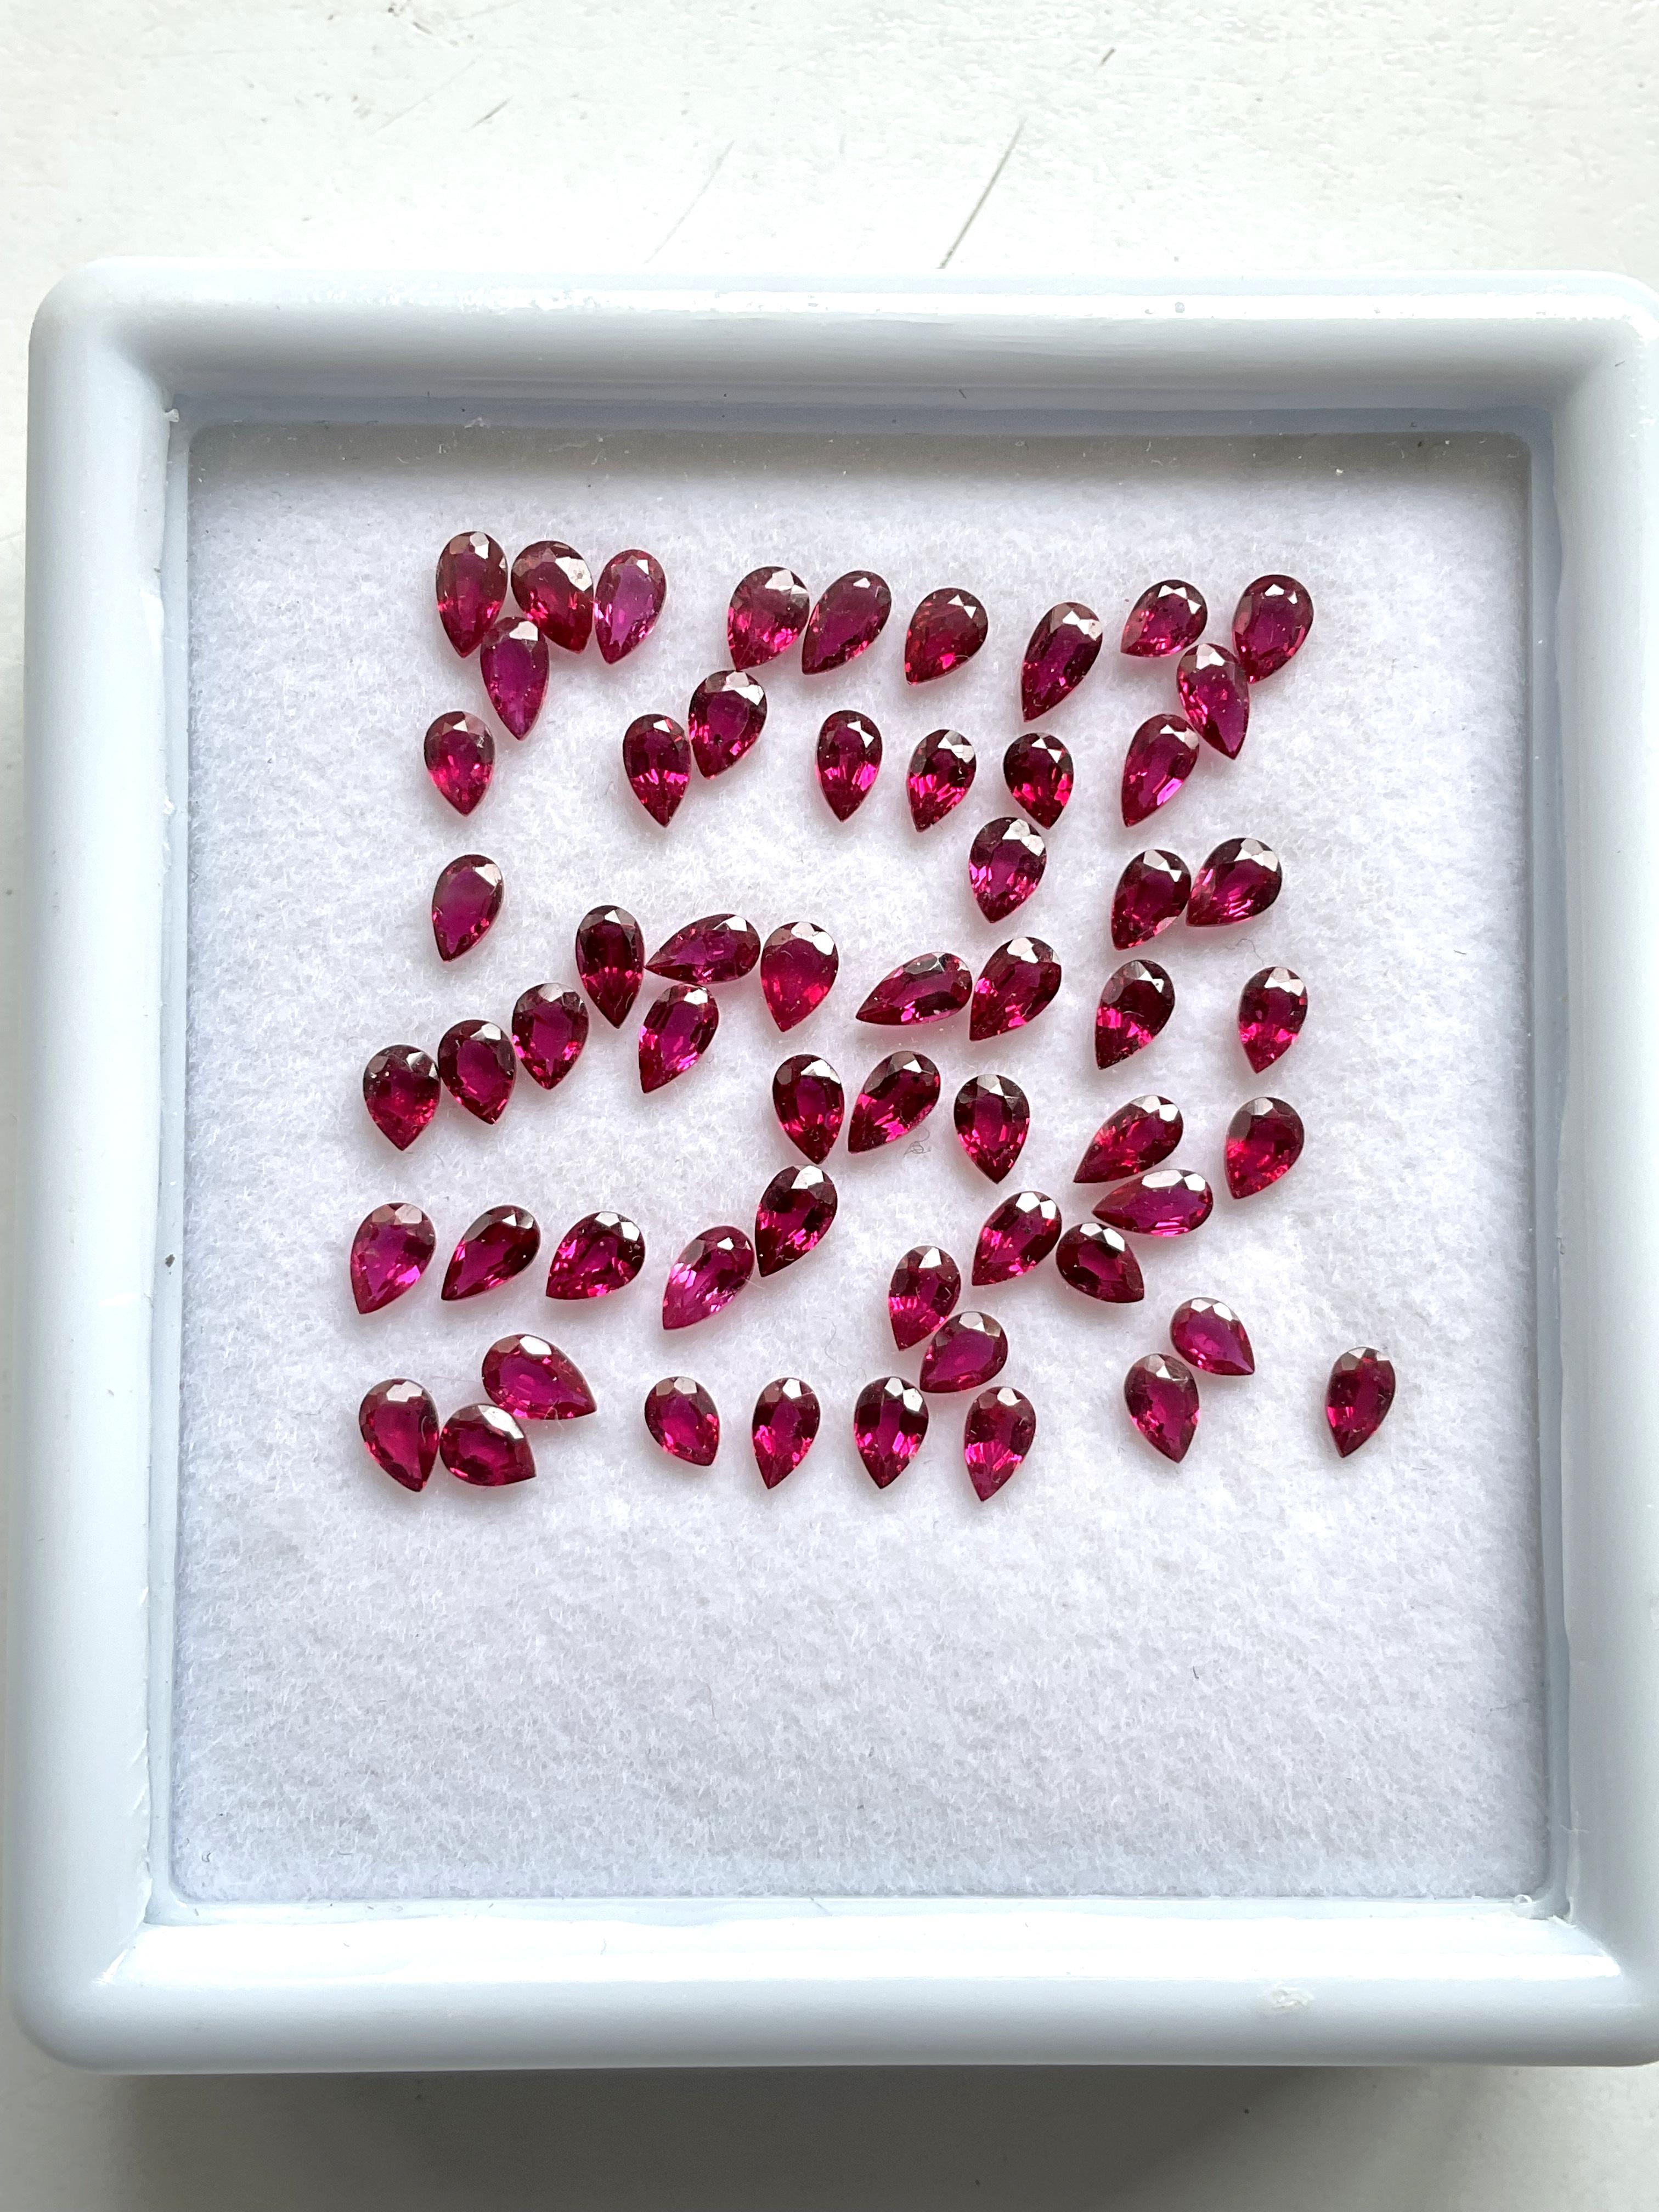 8.21 Carats Mozambique Ruby Top Quality Pear Cut stone No Heat Natural Gemstone For Sale 2